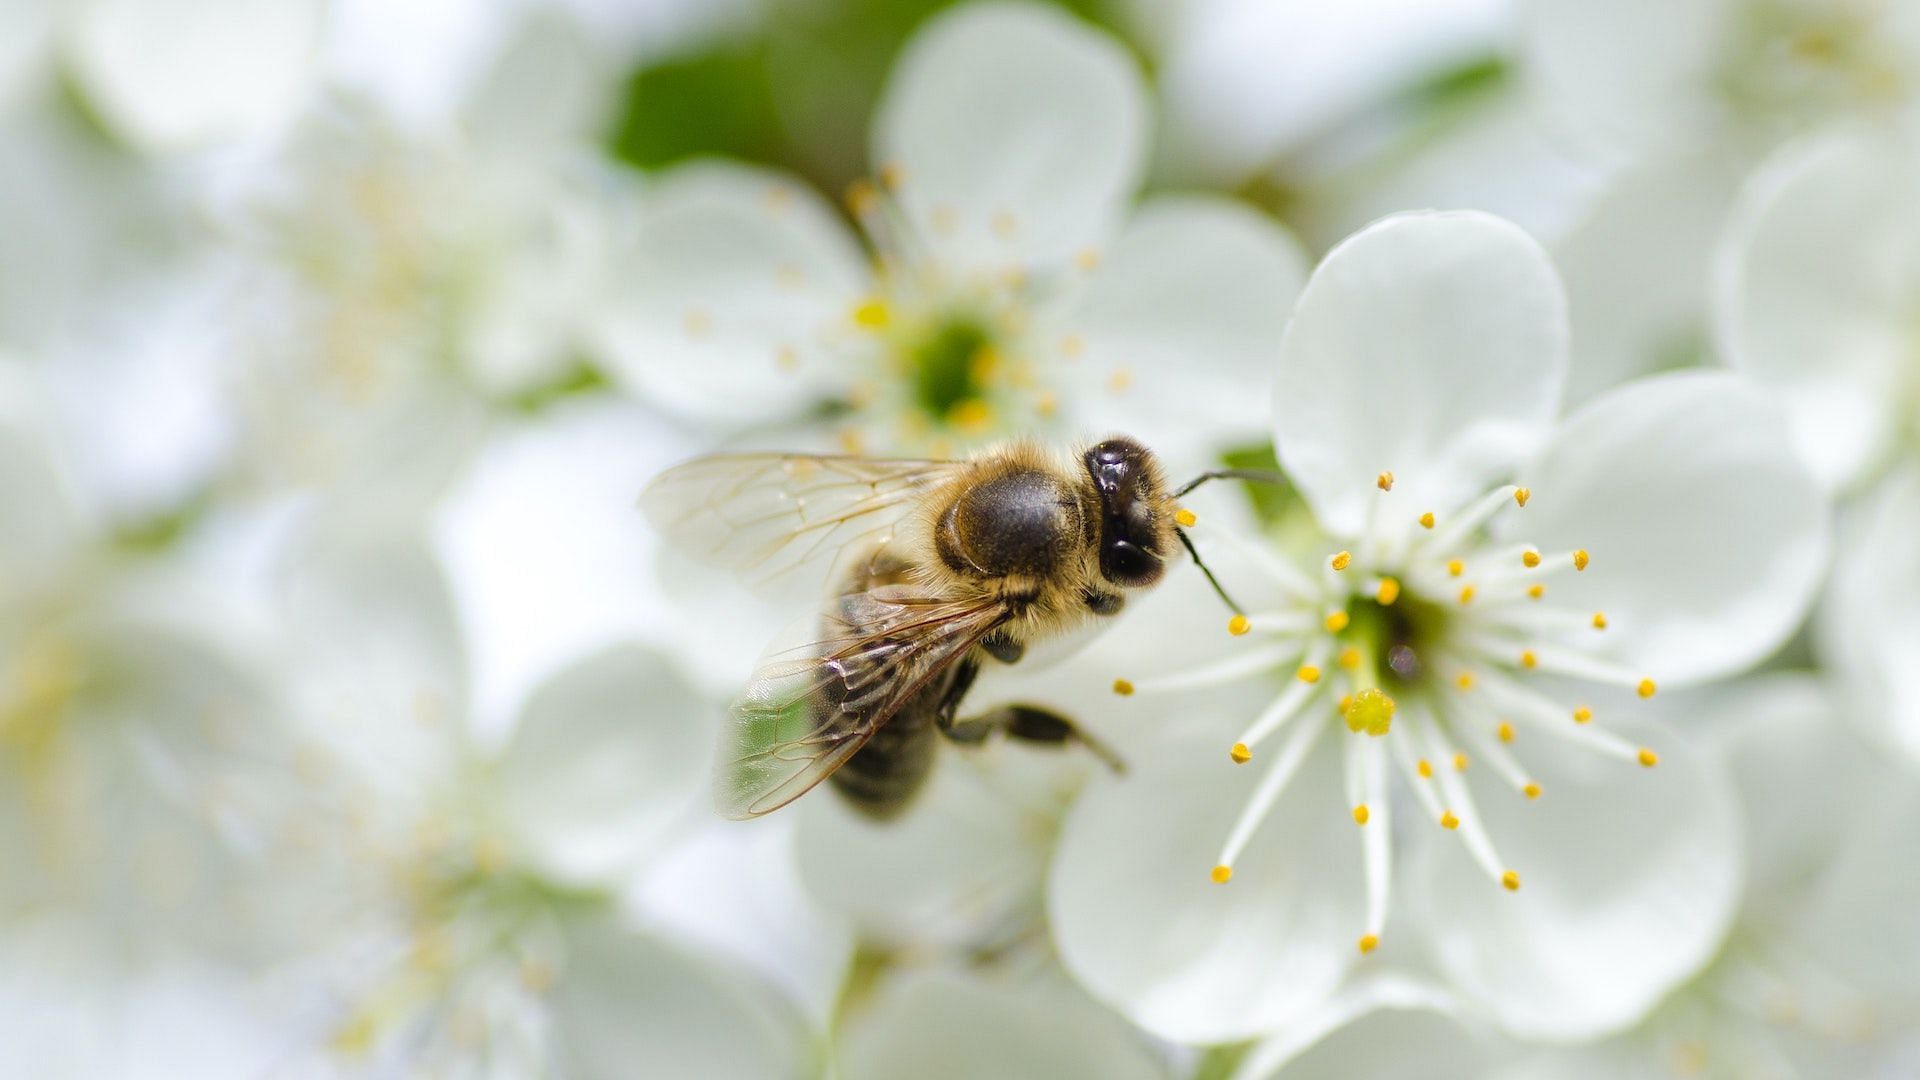 A bee collecting nectar from a flower. Image via Pexels/Lukas